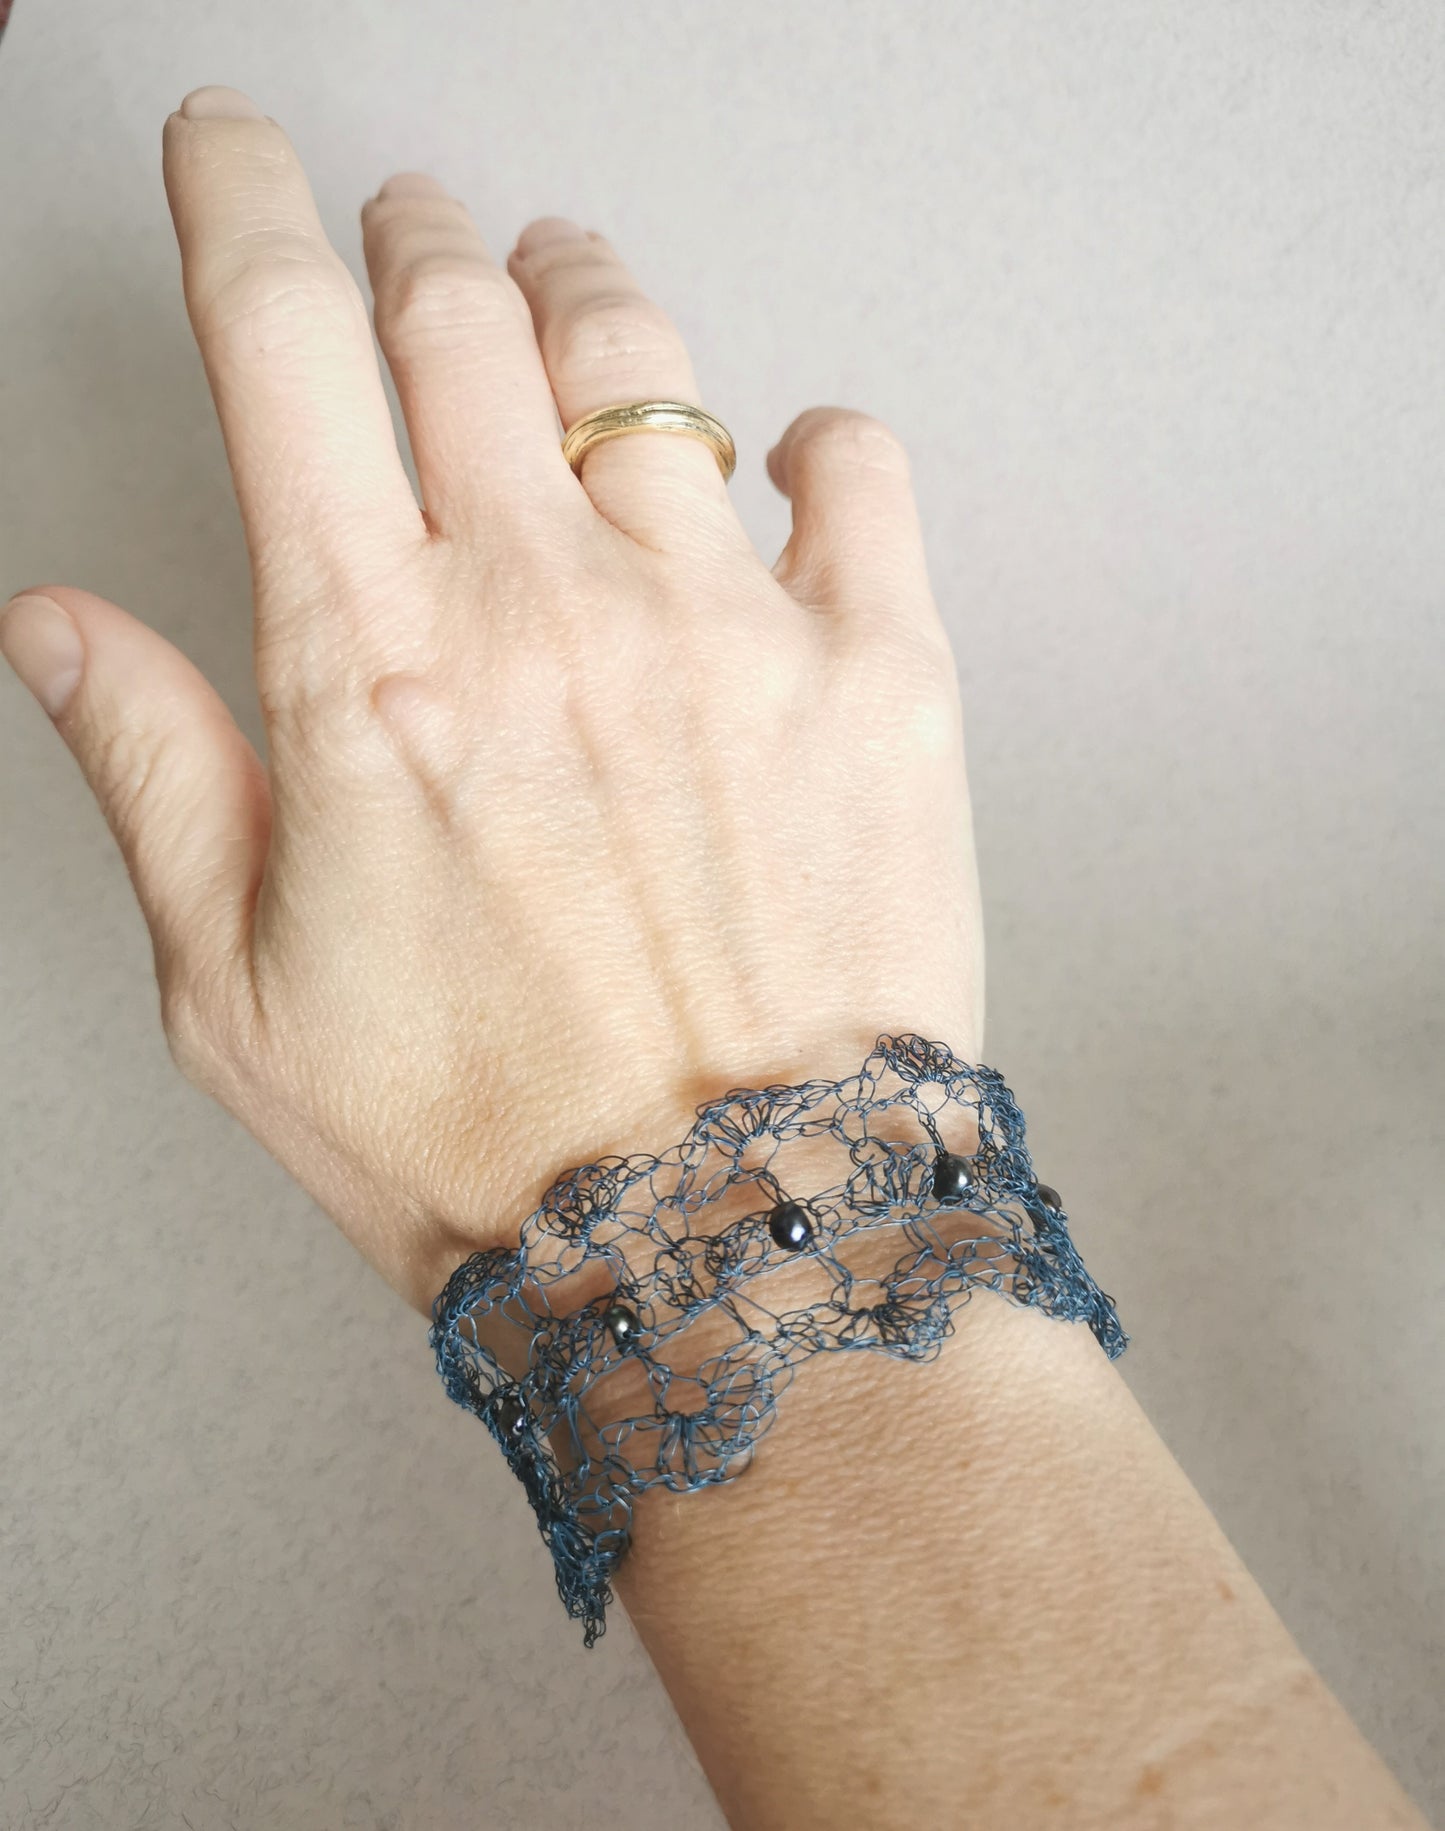 Opaque blue copper wire bracelet with Freshwater Pearls